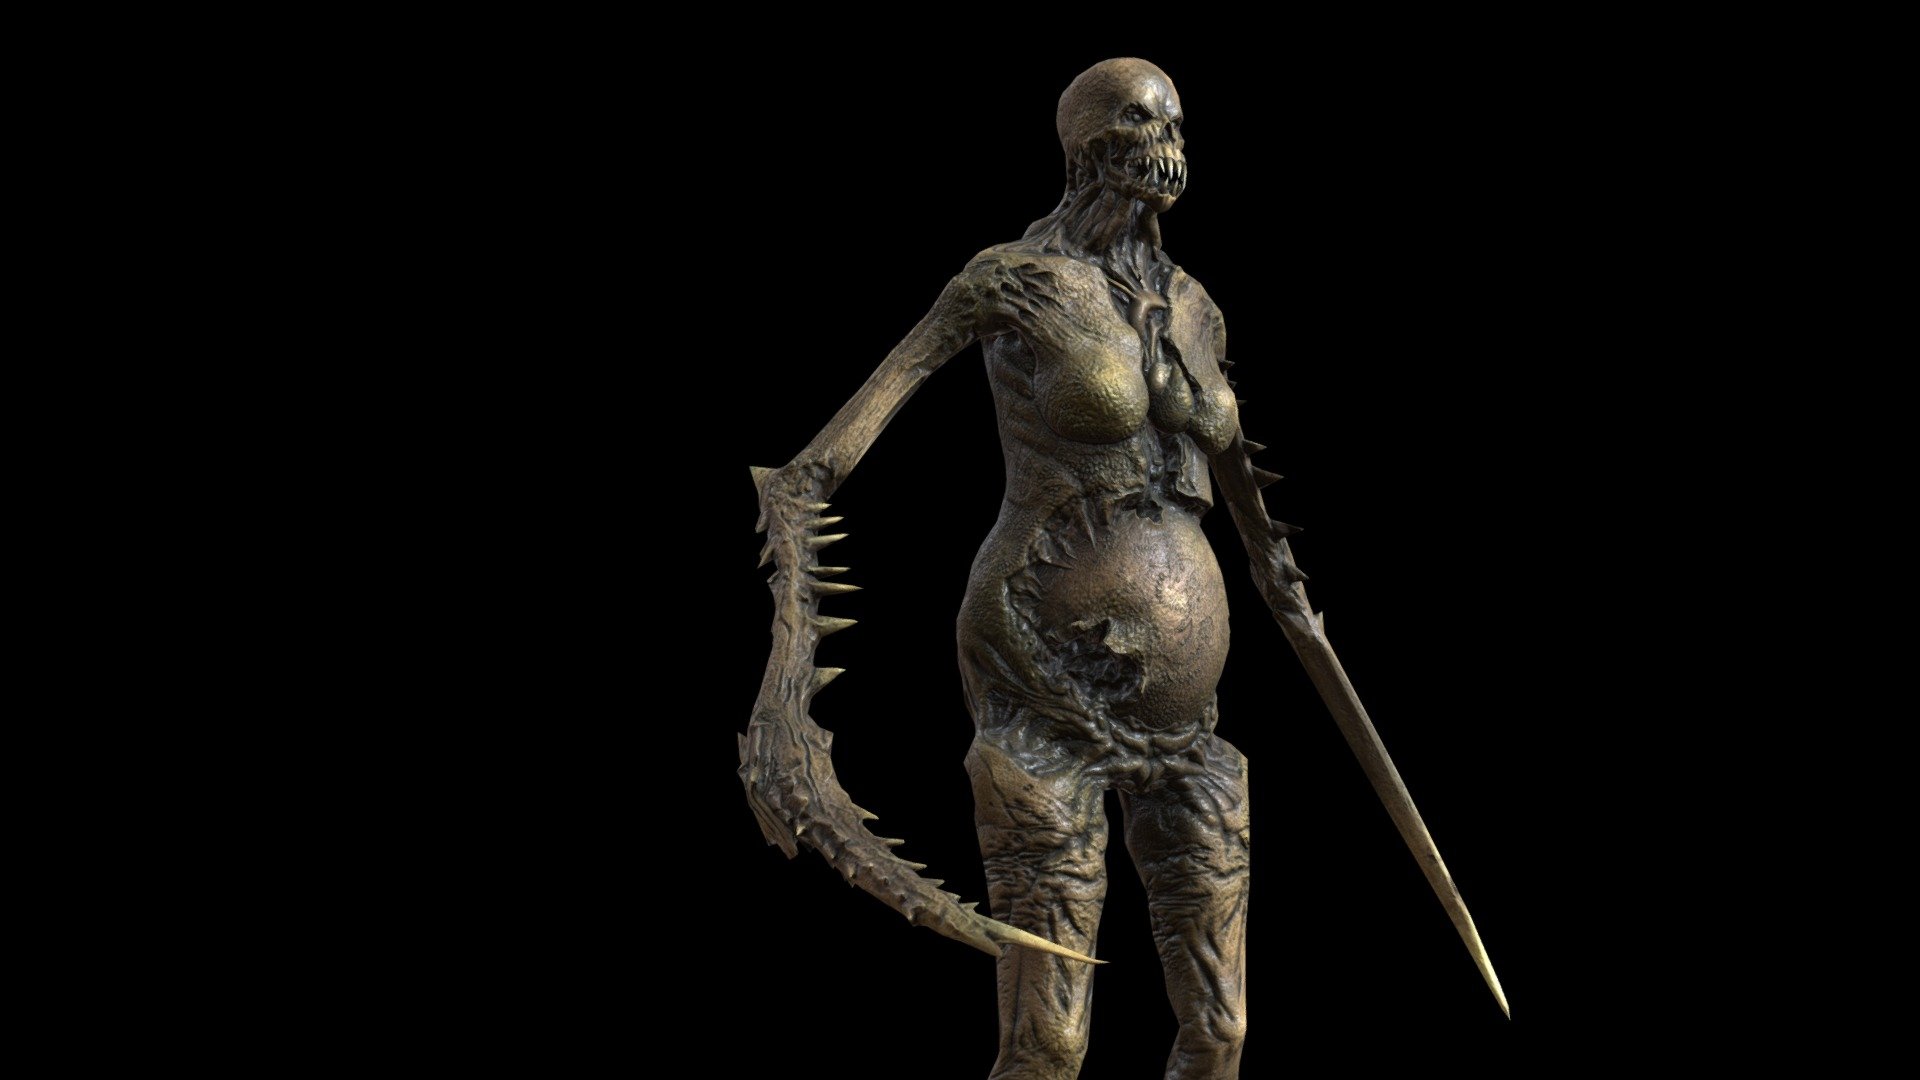 This model has a skeleton of FBX
There is also one set of textures in the PBR format
The model is in A pose.
Other skins, animations, and other additional features are available in other stores, but the model there is much more expensive
If you can then animate it yourself, at the expense of a mixome or other resources, then great. If not, I would consider buying elsewhere.
Here you can spin the model to evaluate its quality and design 3d model